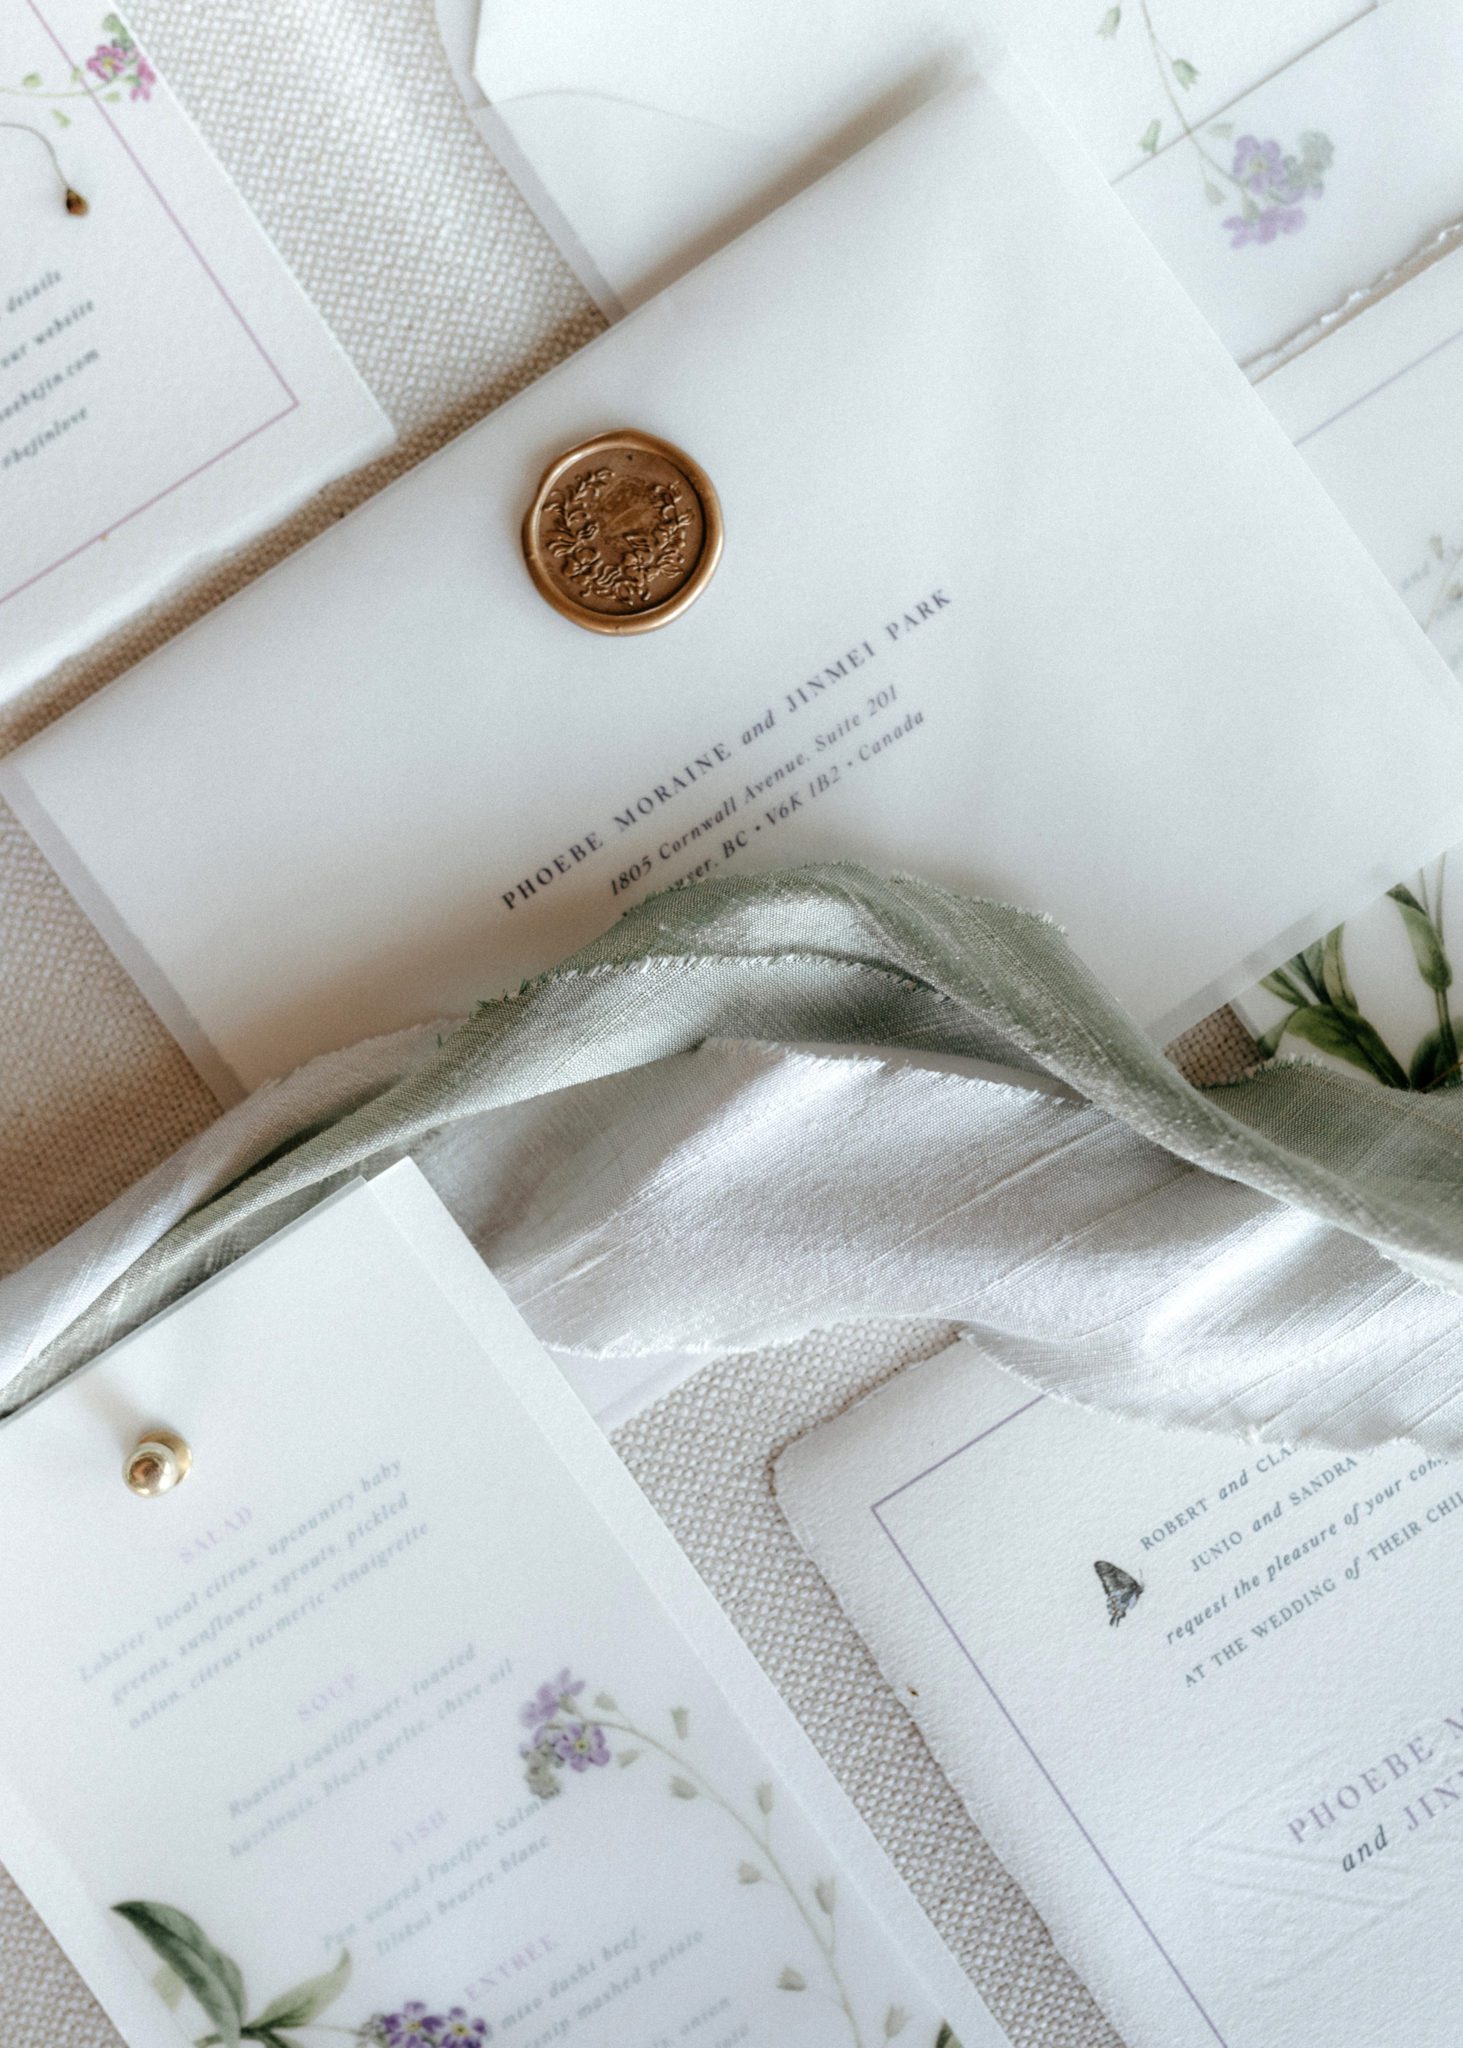 Classic romantic wedding stationery with olive green ribbon